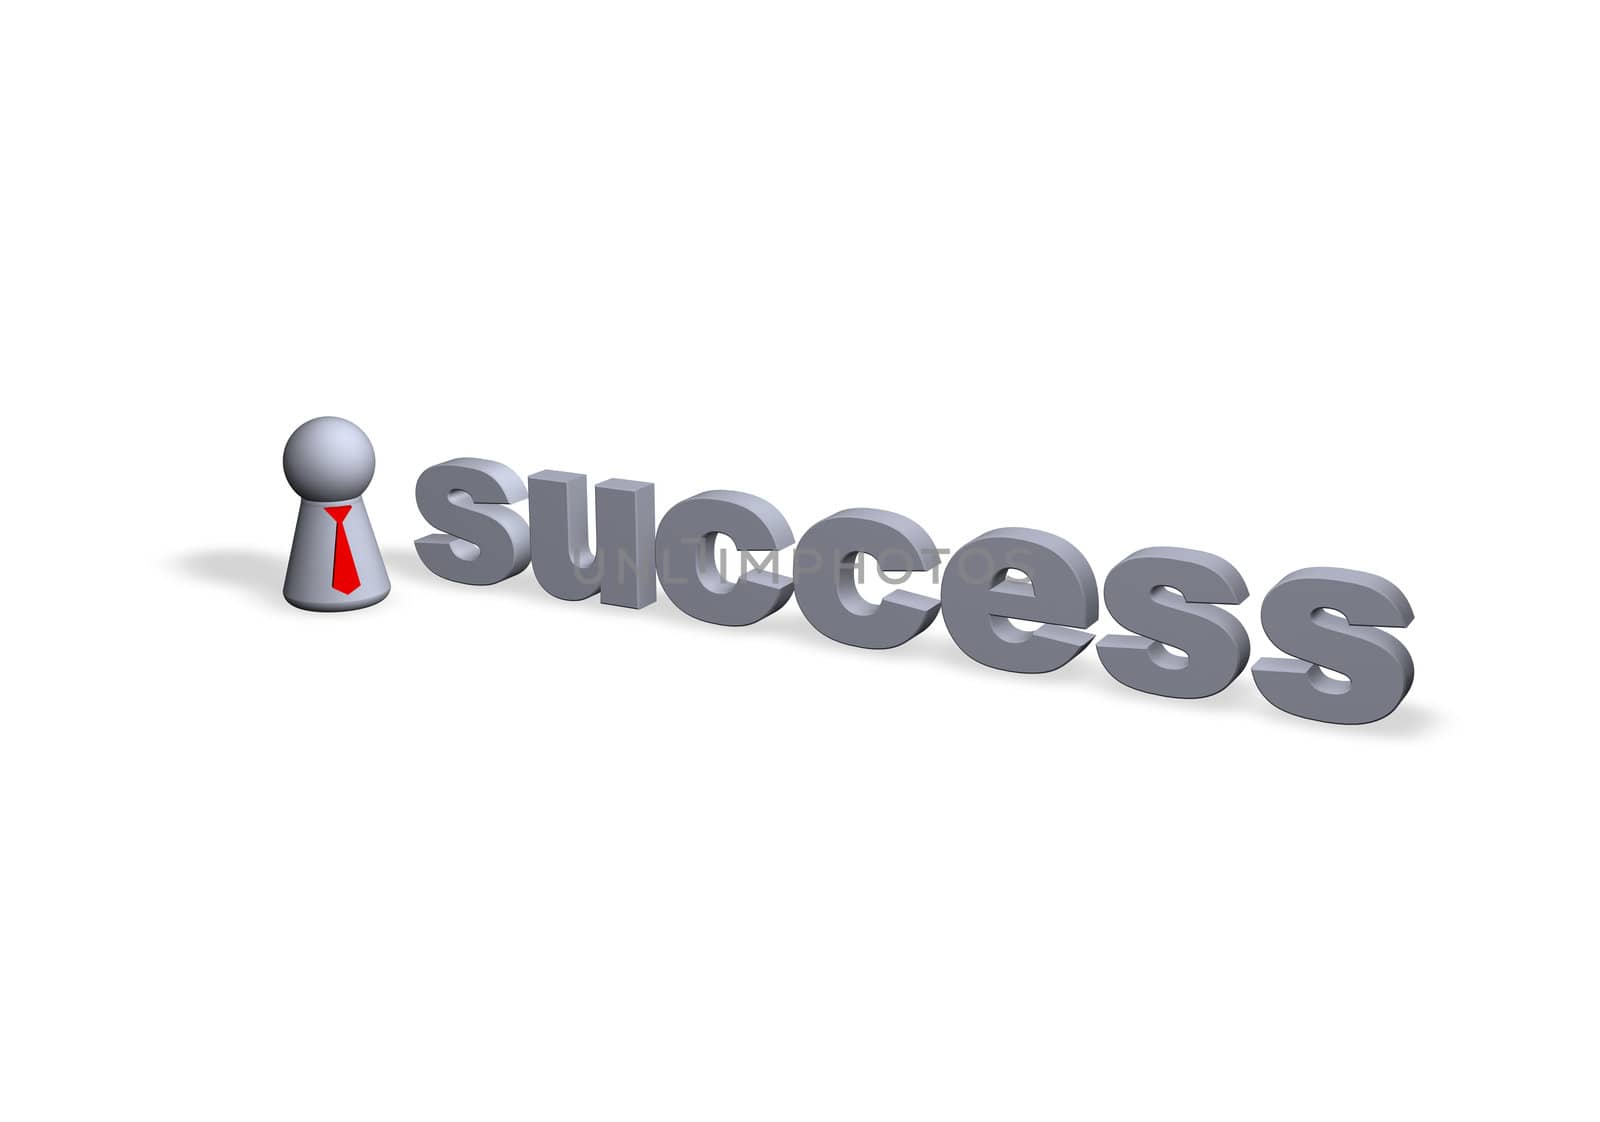 success text in 3d and play figure with red tie